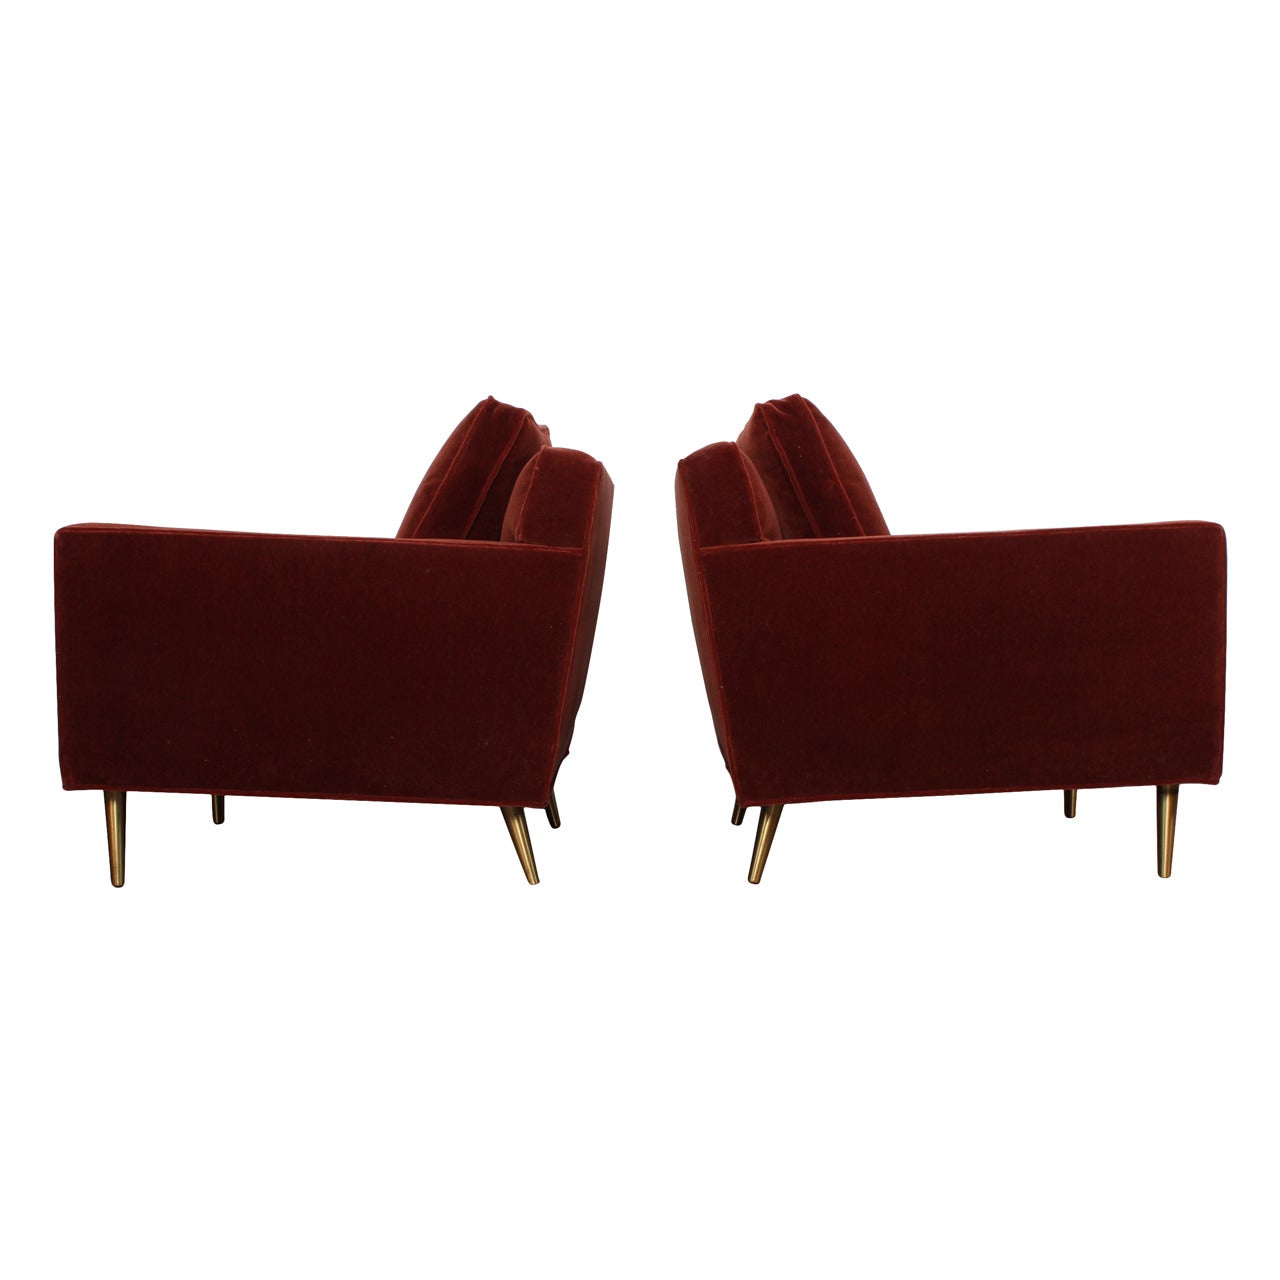 Pair of Brass Legged Lounge Chairs by Edward Wormley for Dunbar